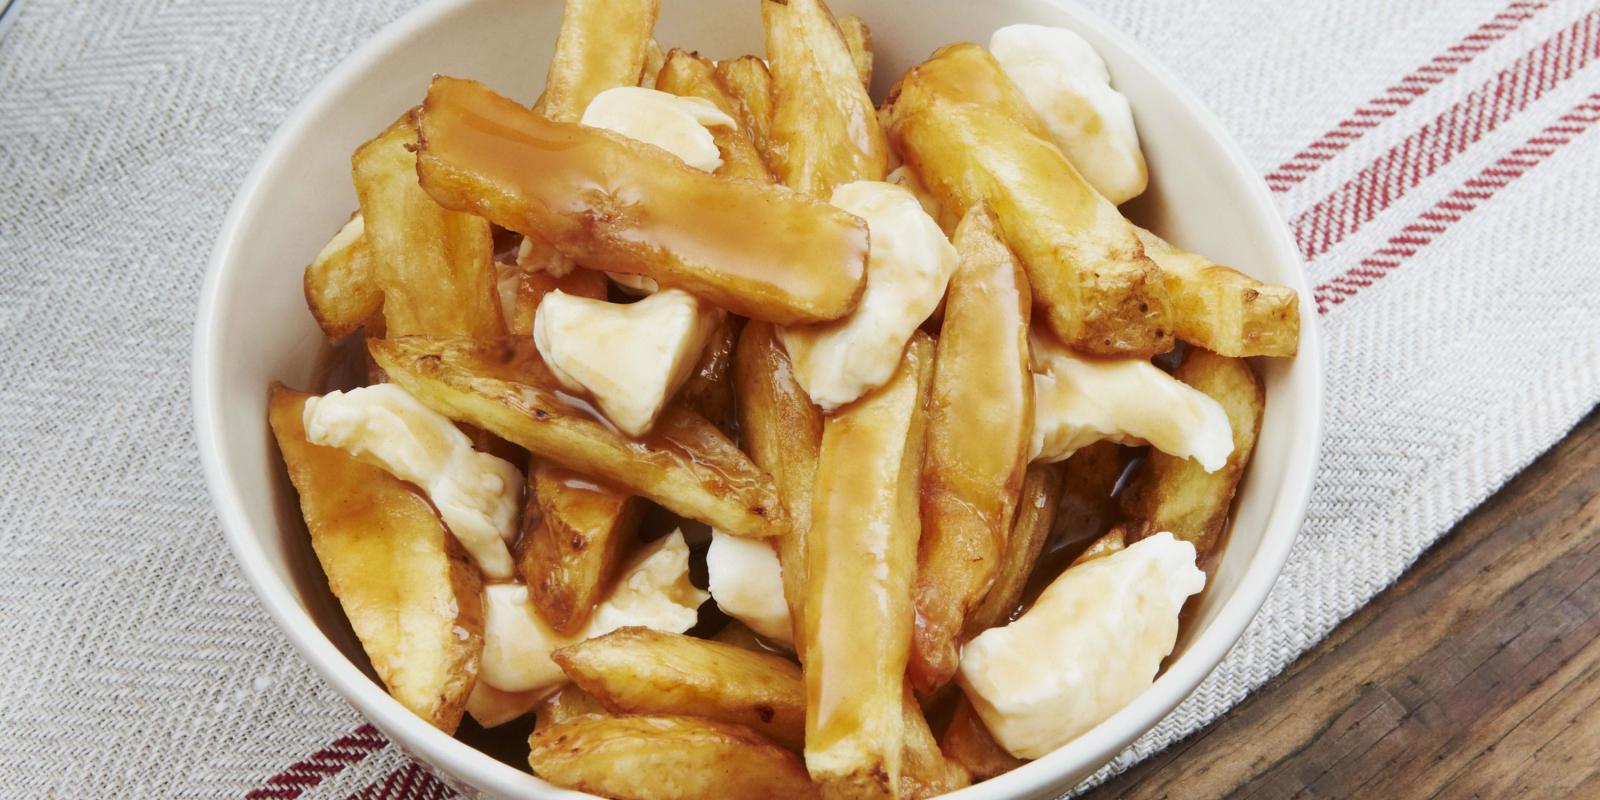 A plate of poutine, Quebec's traditionnal dish